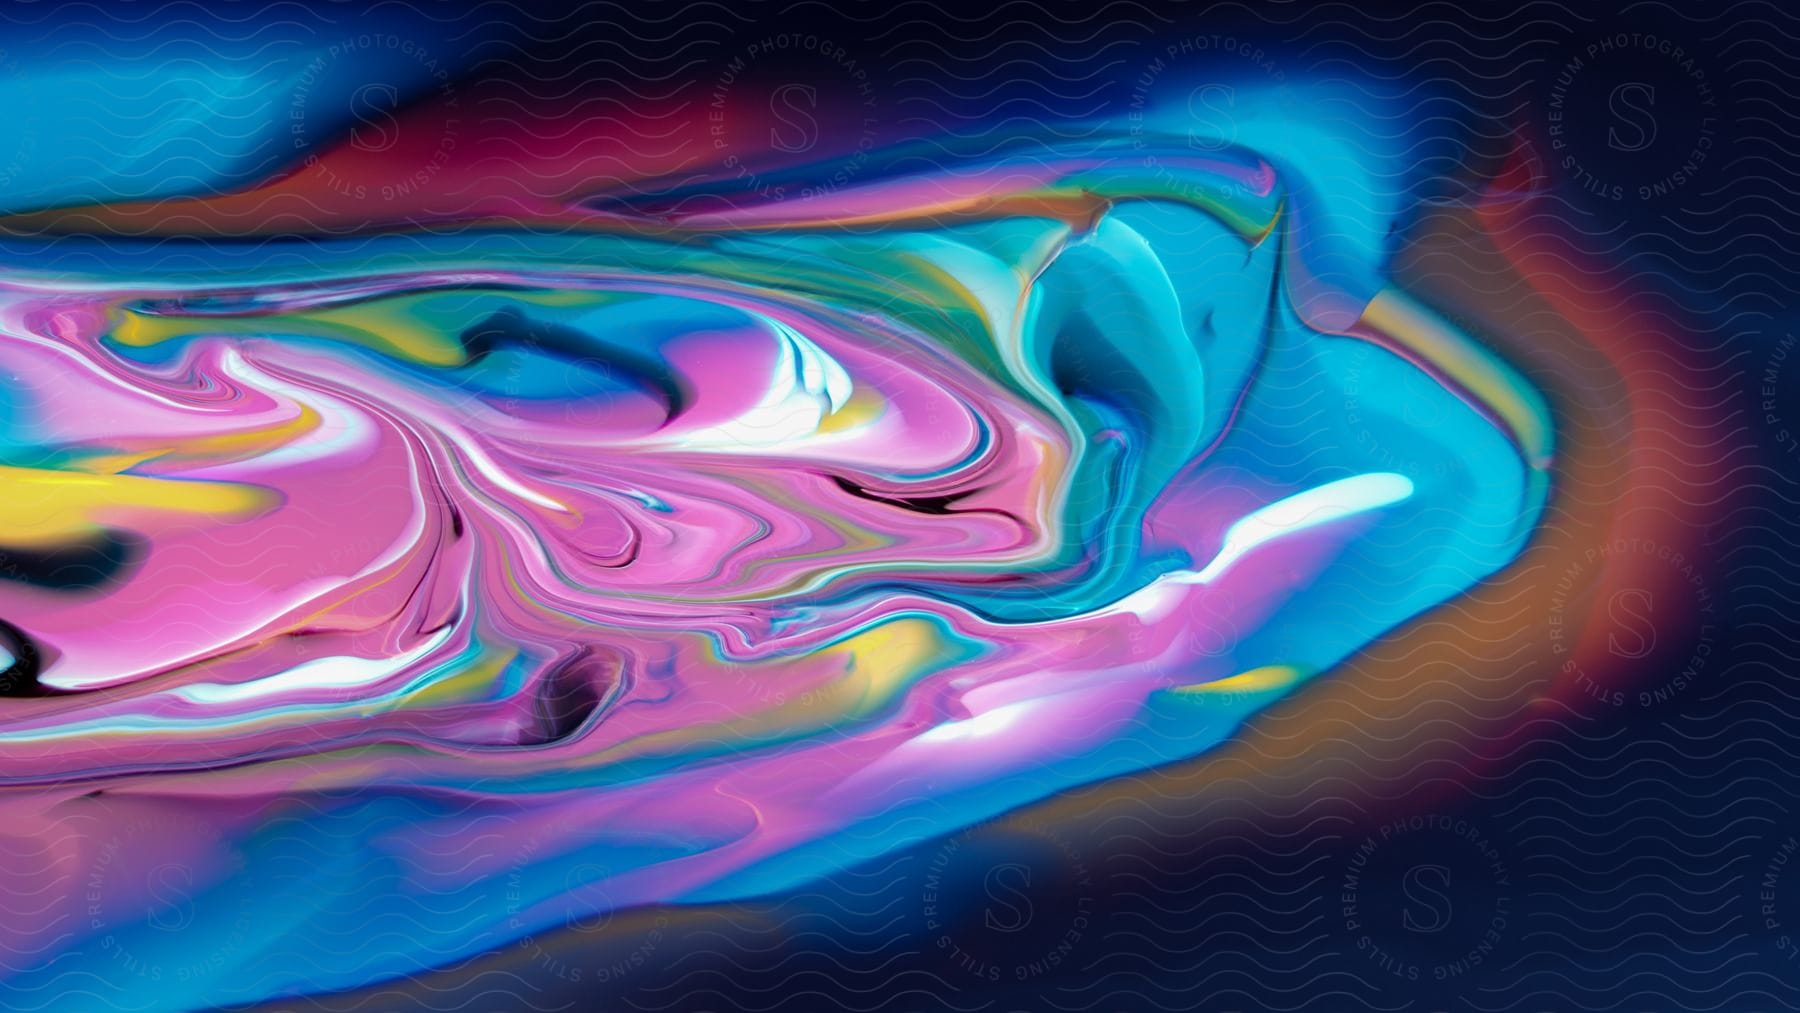 Swirls of pink blue and yellow colored liquid in an abstract multicolored fluid art image with neon color and highlight glow